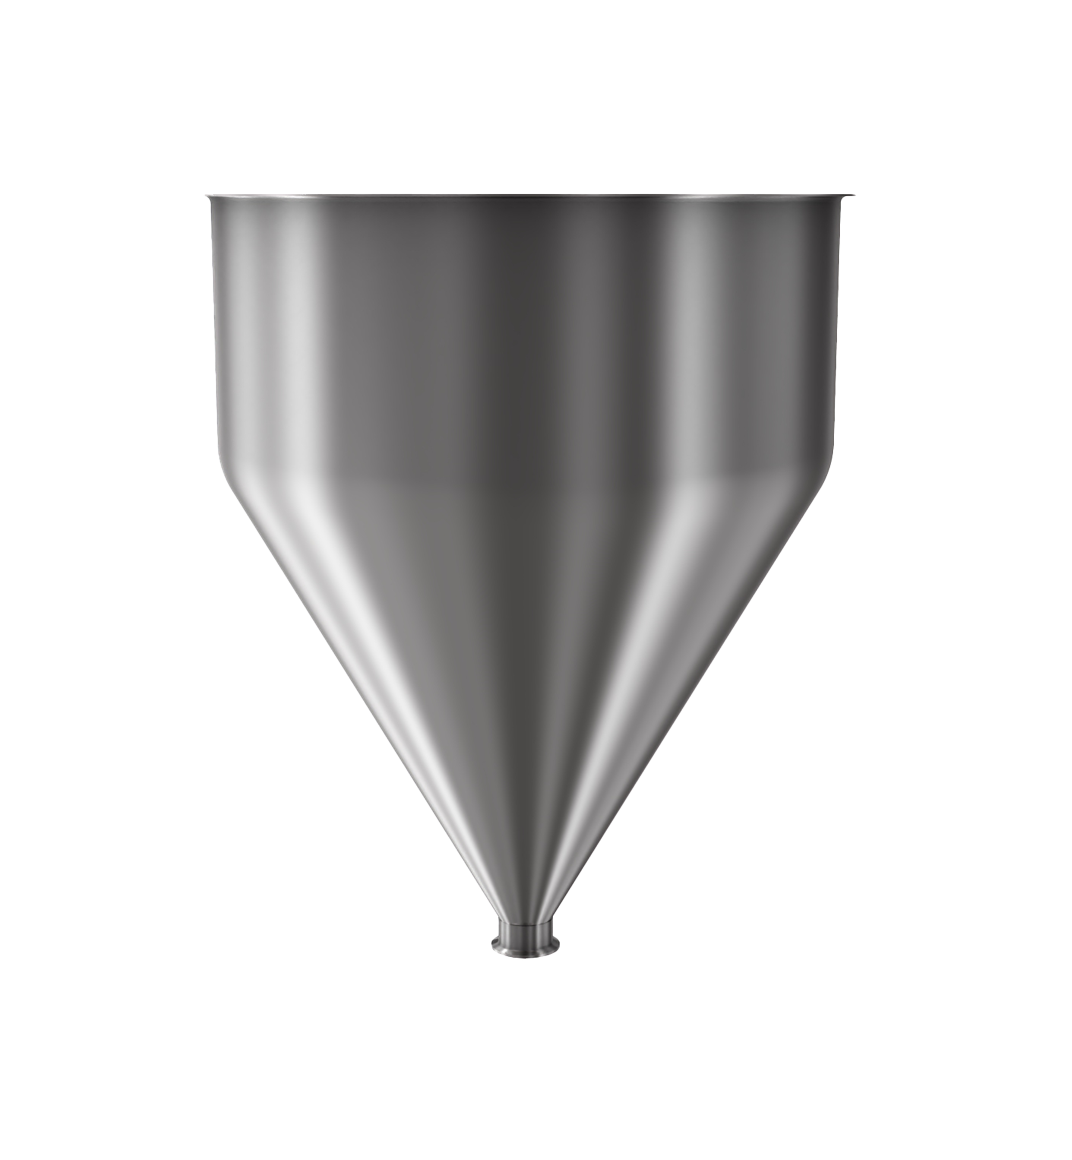 304 Stainless Steel funnel with 2" sanitary fitting 24.2 gallons, 21.09" ID x 26.95" OAH